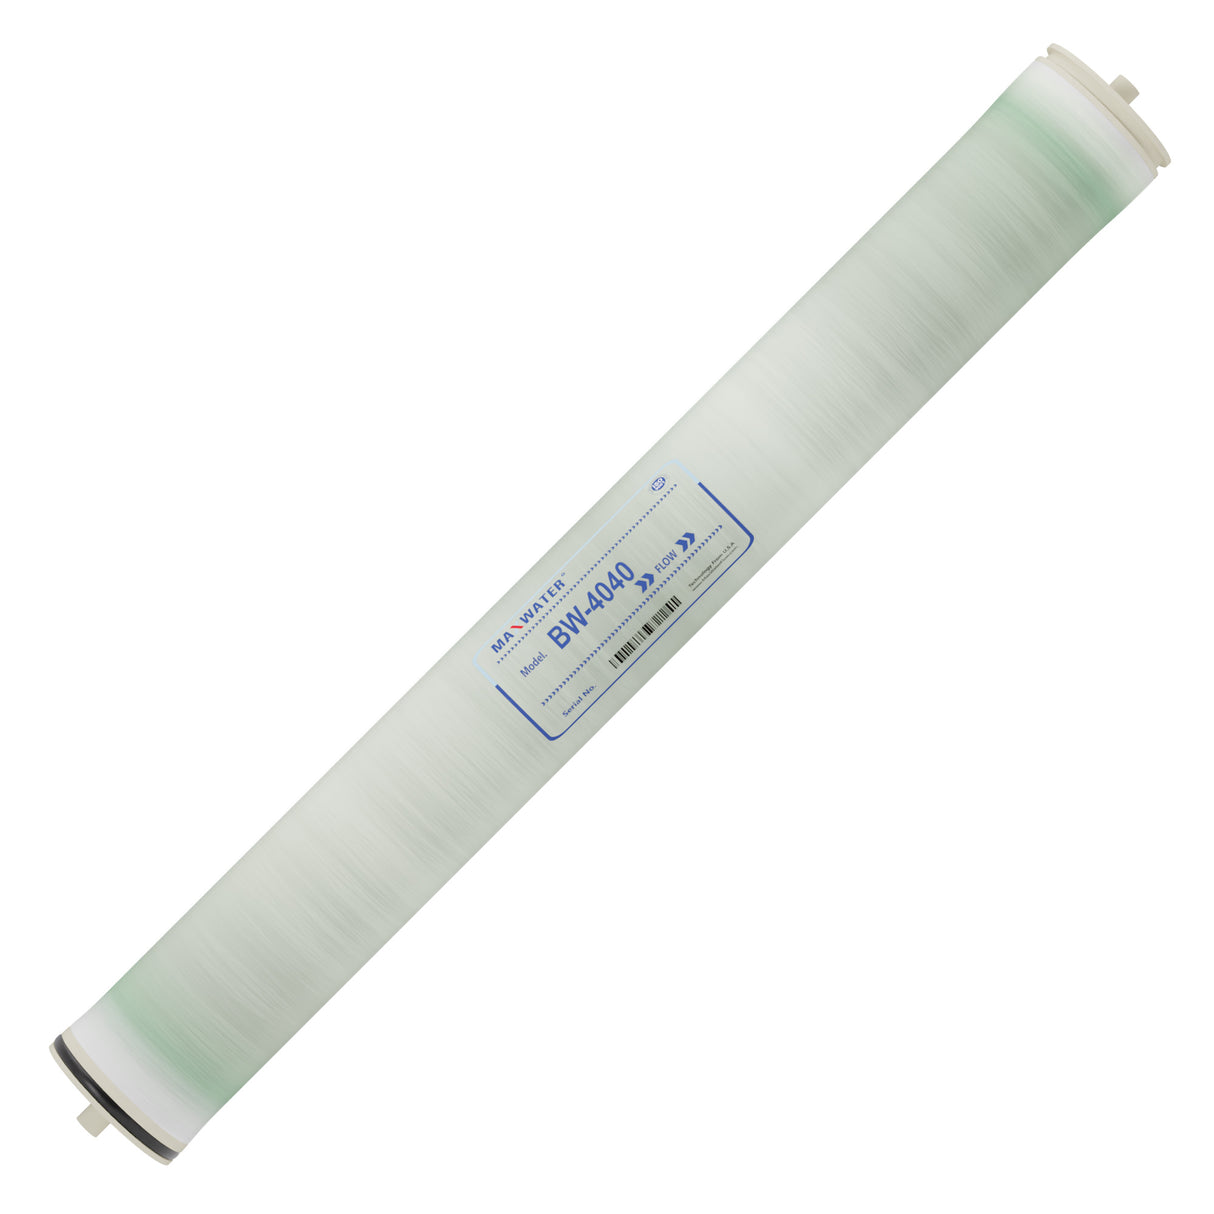 BW variant 4x40-inch RO membrane - optimized for treating brackish water by Brackish Water.